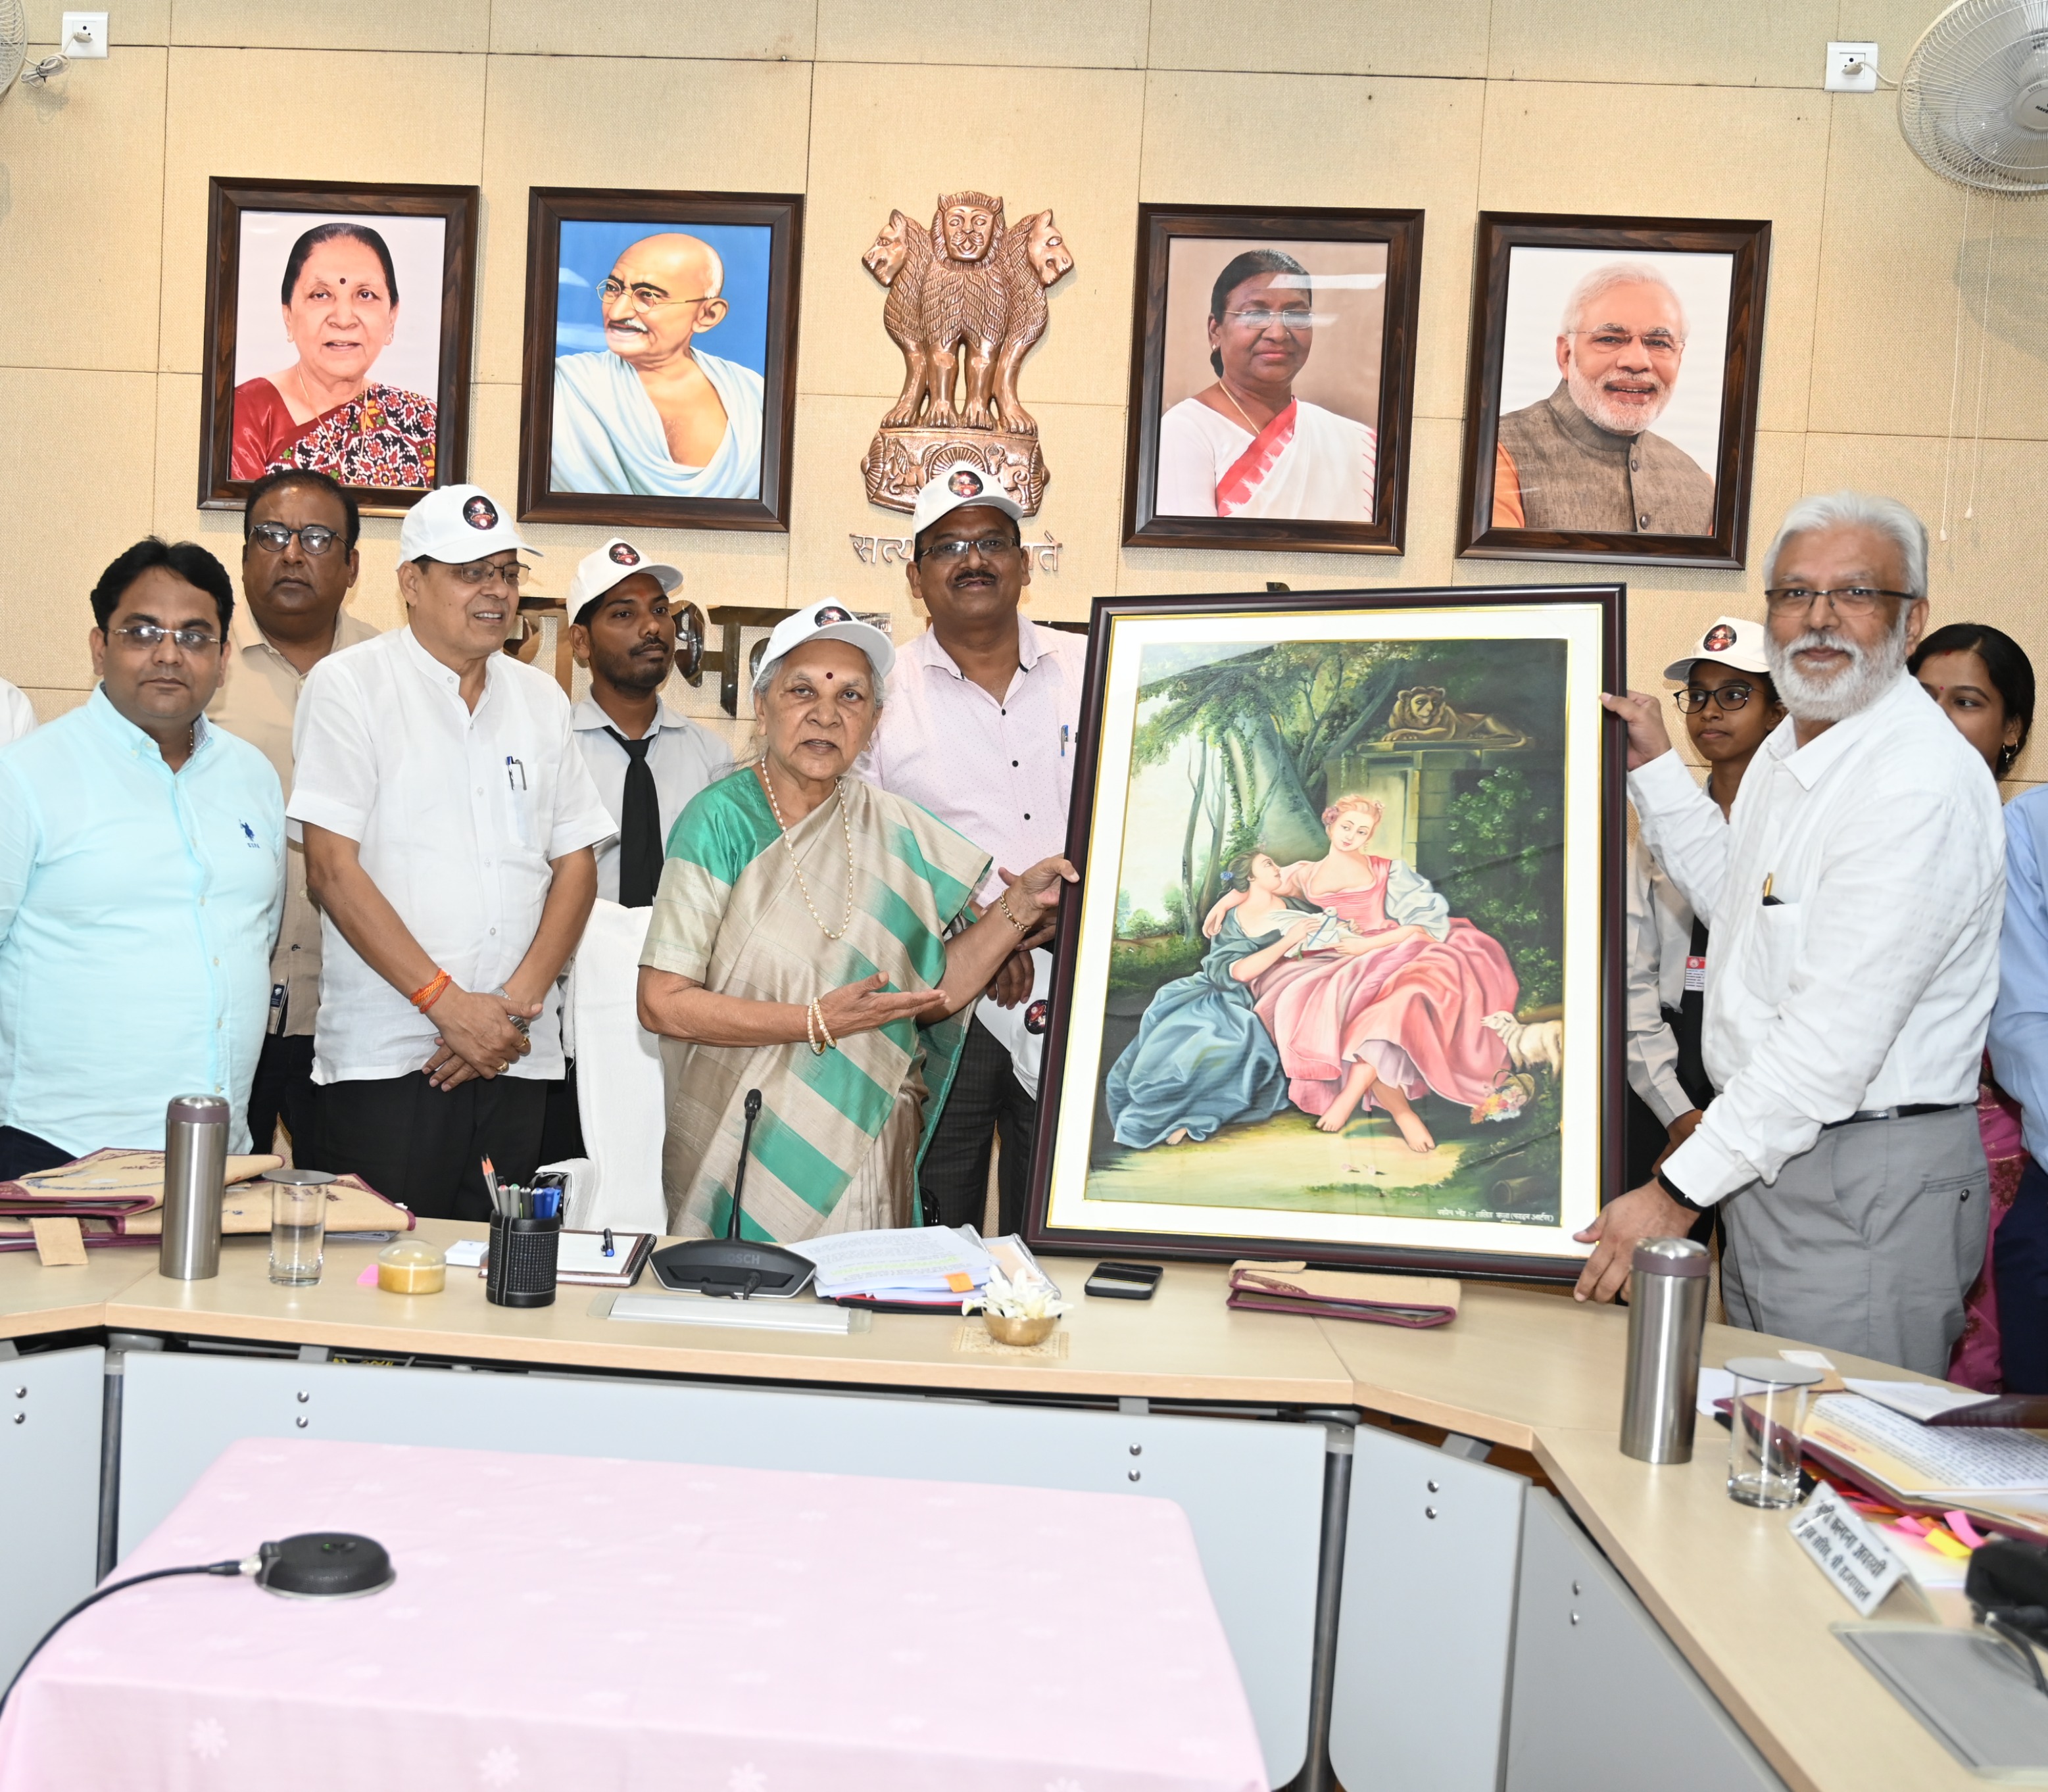 The Governor launched the "Mobile App" and "Emblem" for “Divya Deepotsav-2022” developed & created by Dr. Ram Manohar Lohia Avadh University, Ayodhya